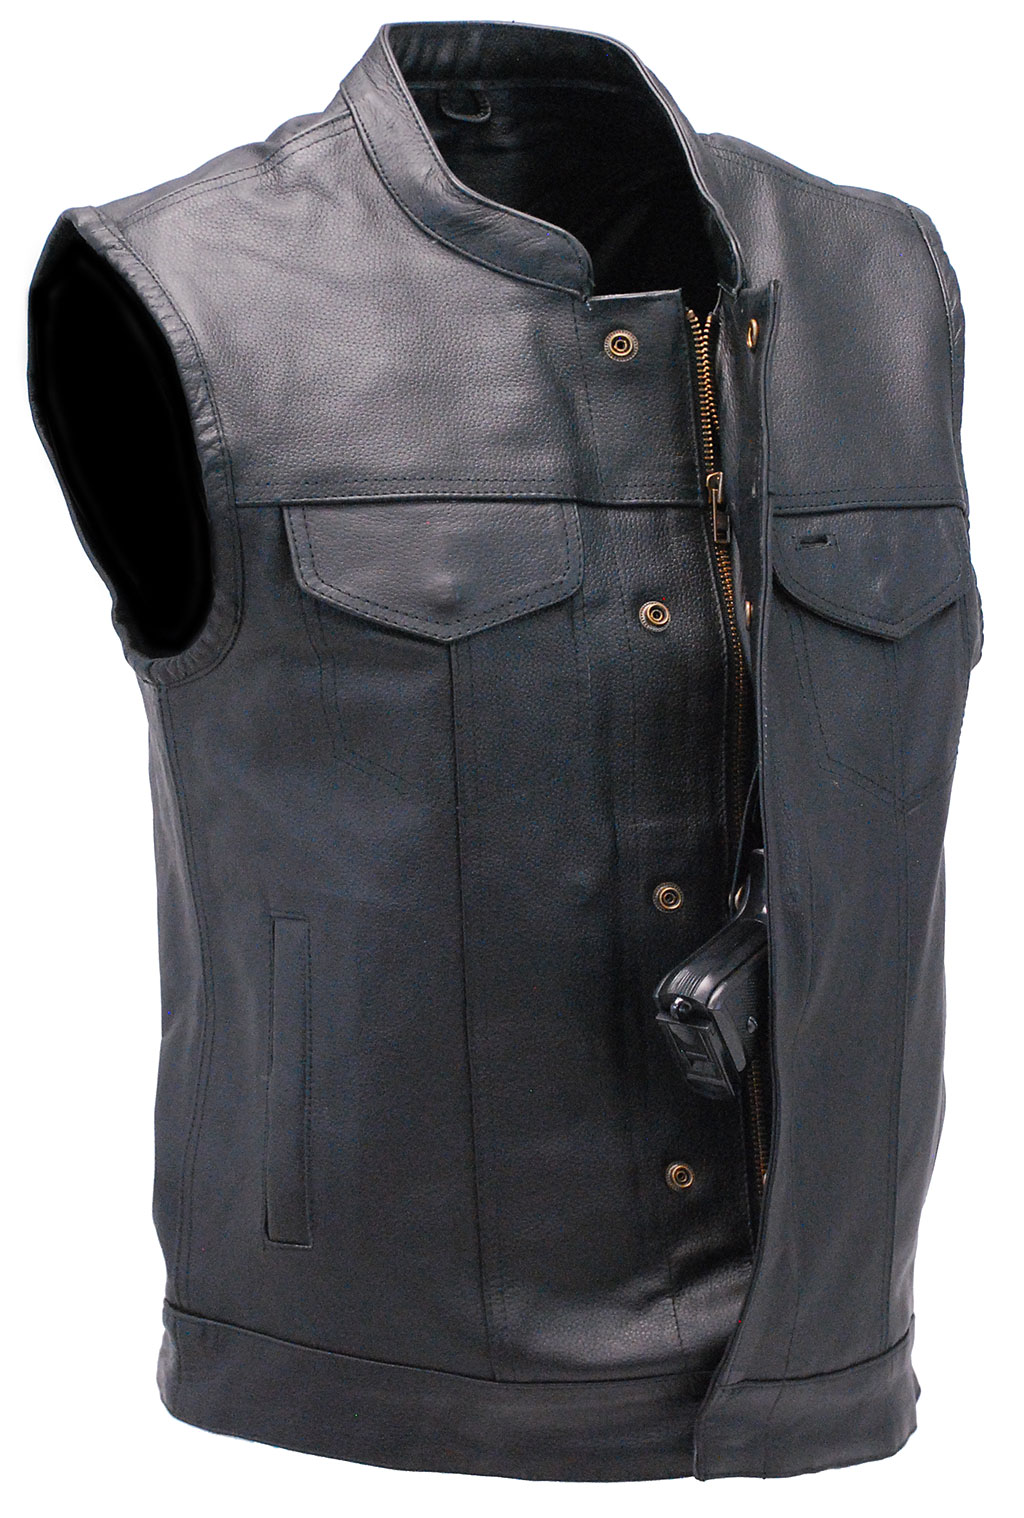 LEATHER CLUB VEST WITH CONCEALED POCKETS